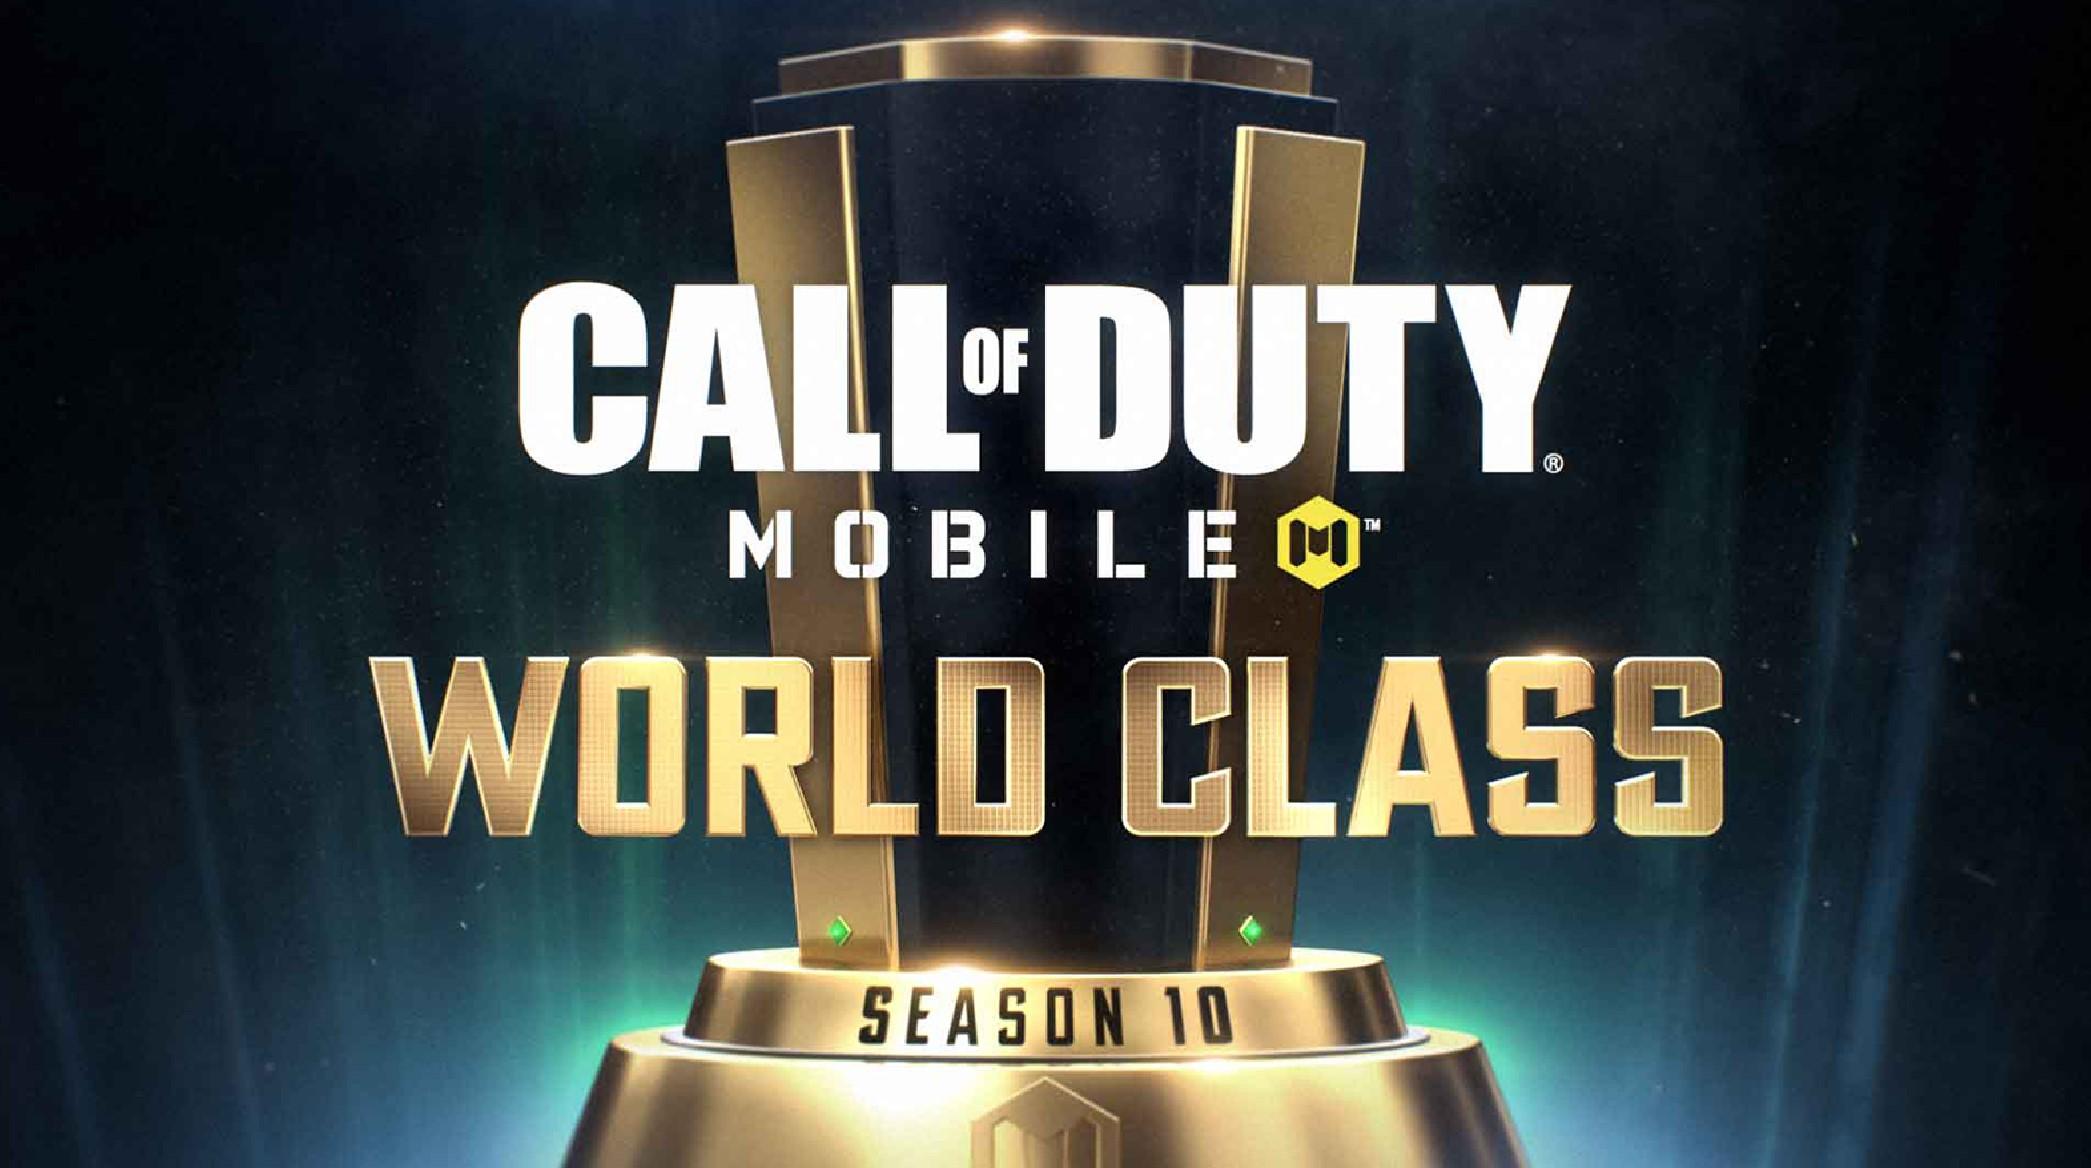 Tournament Mode is Not Showing in COD Mobile 